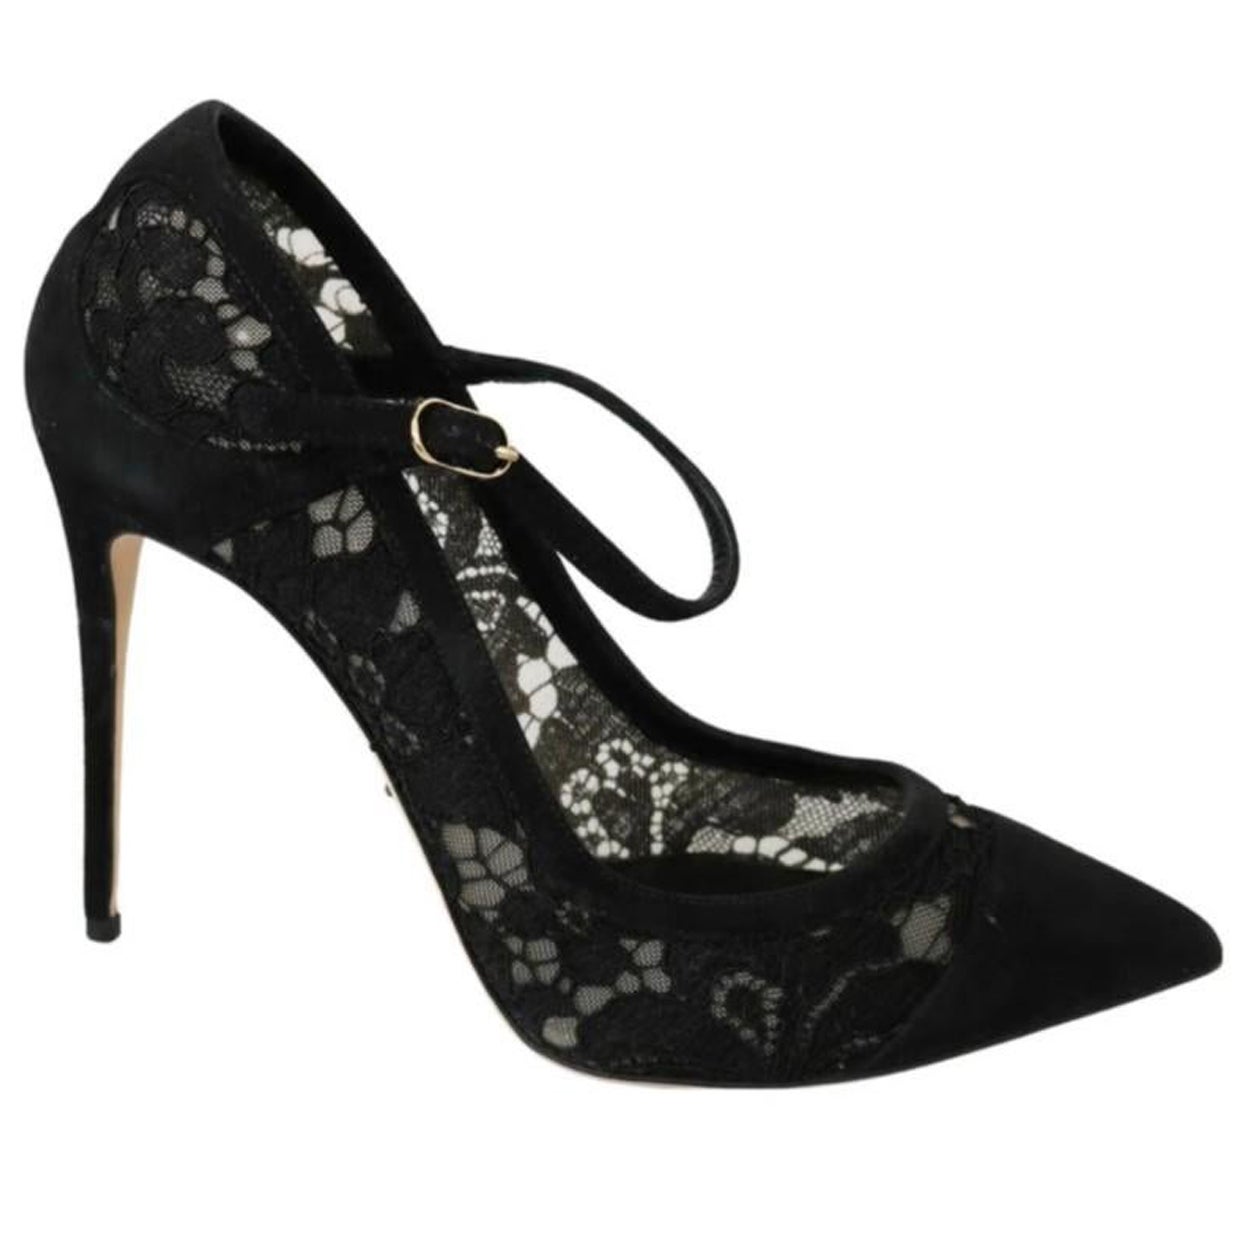 Dolce & Gabbana Black Taormina Lace Leather Mary Jane High Heels Shoes Floral